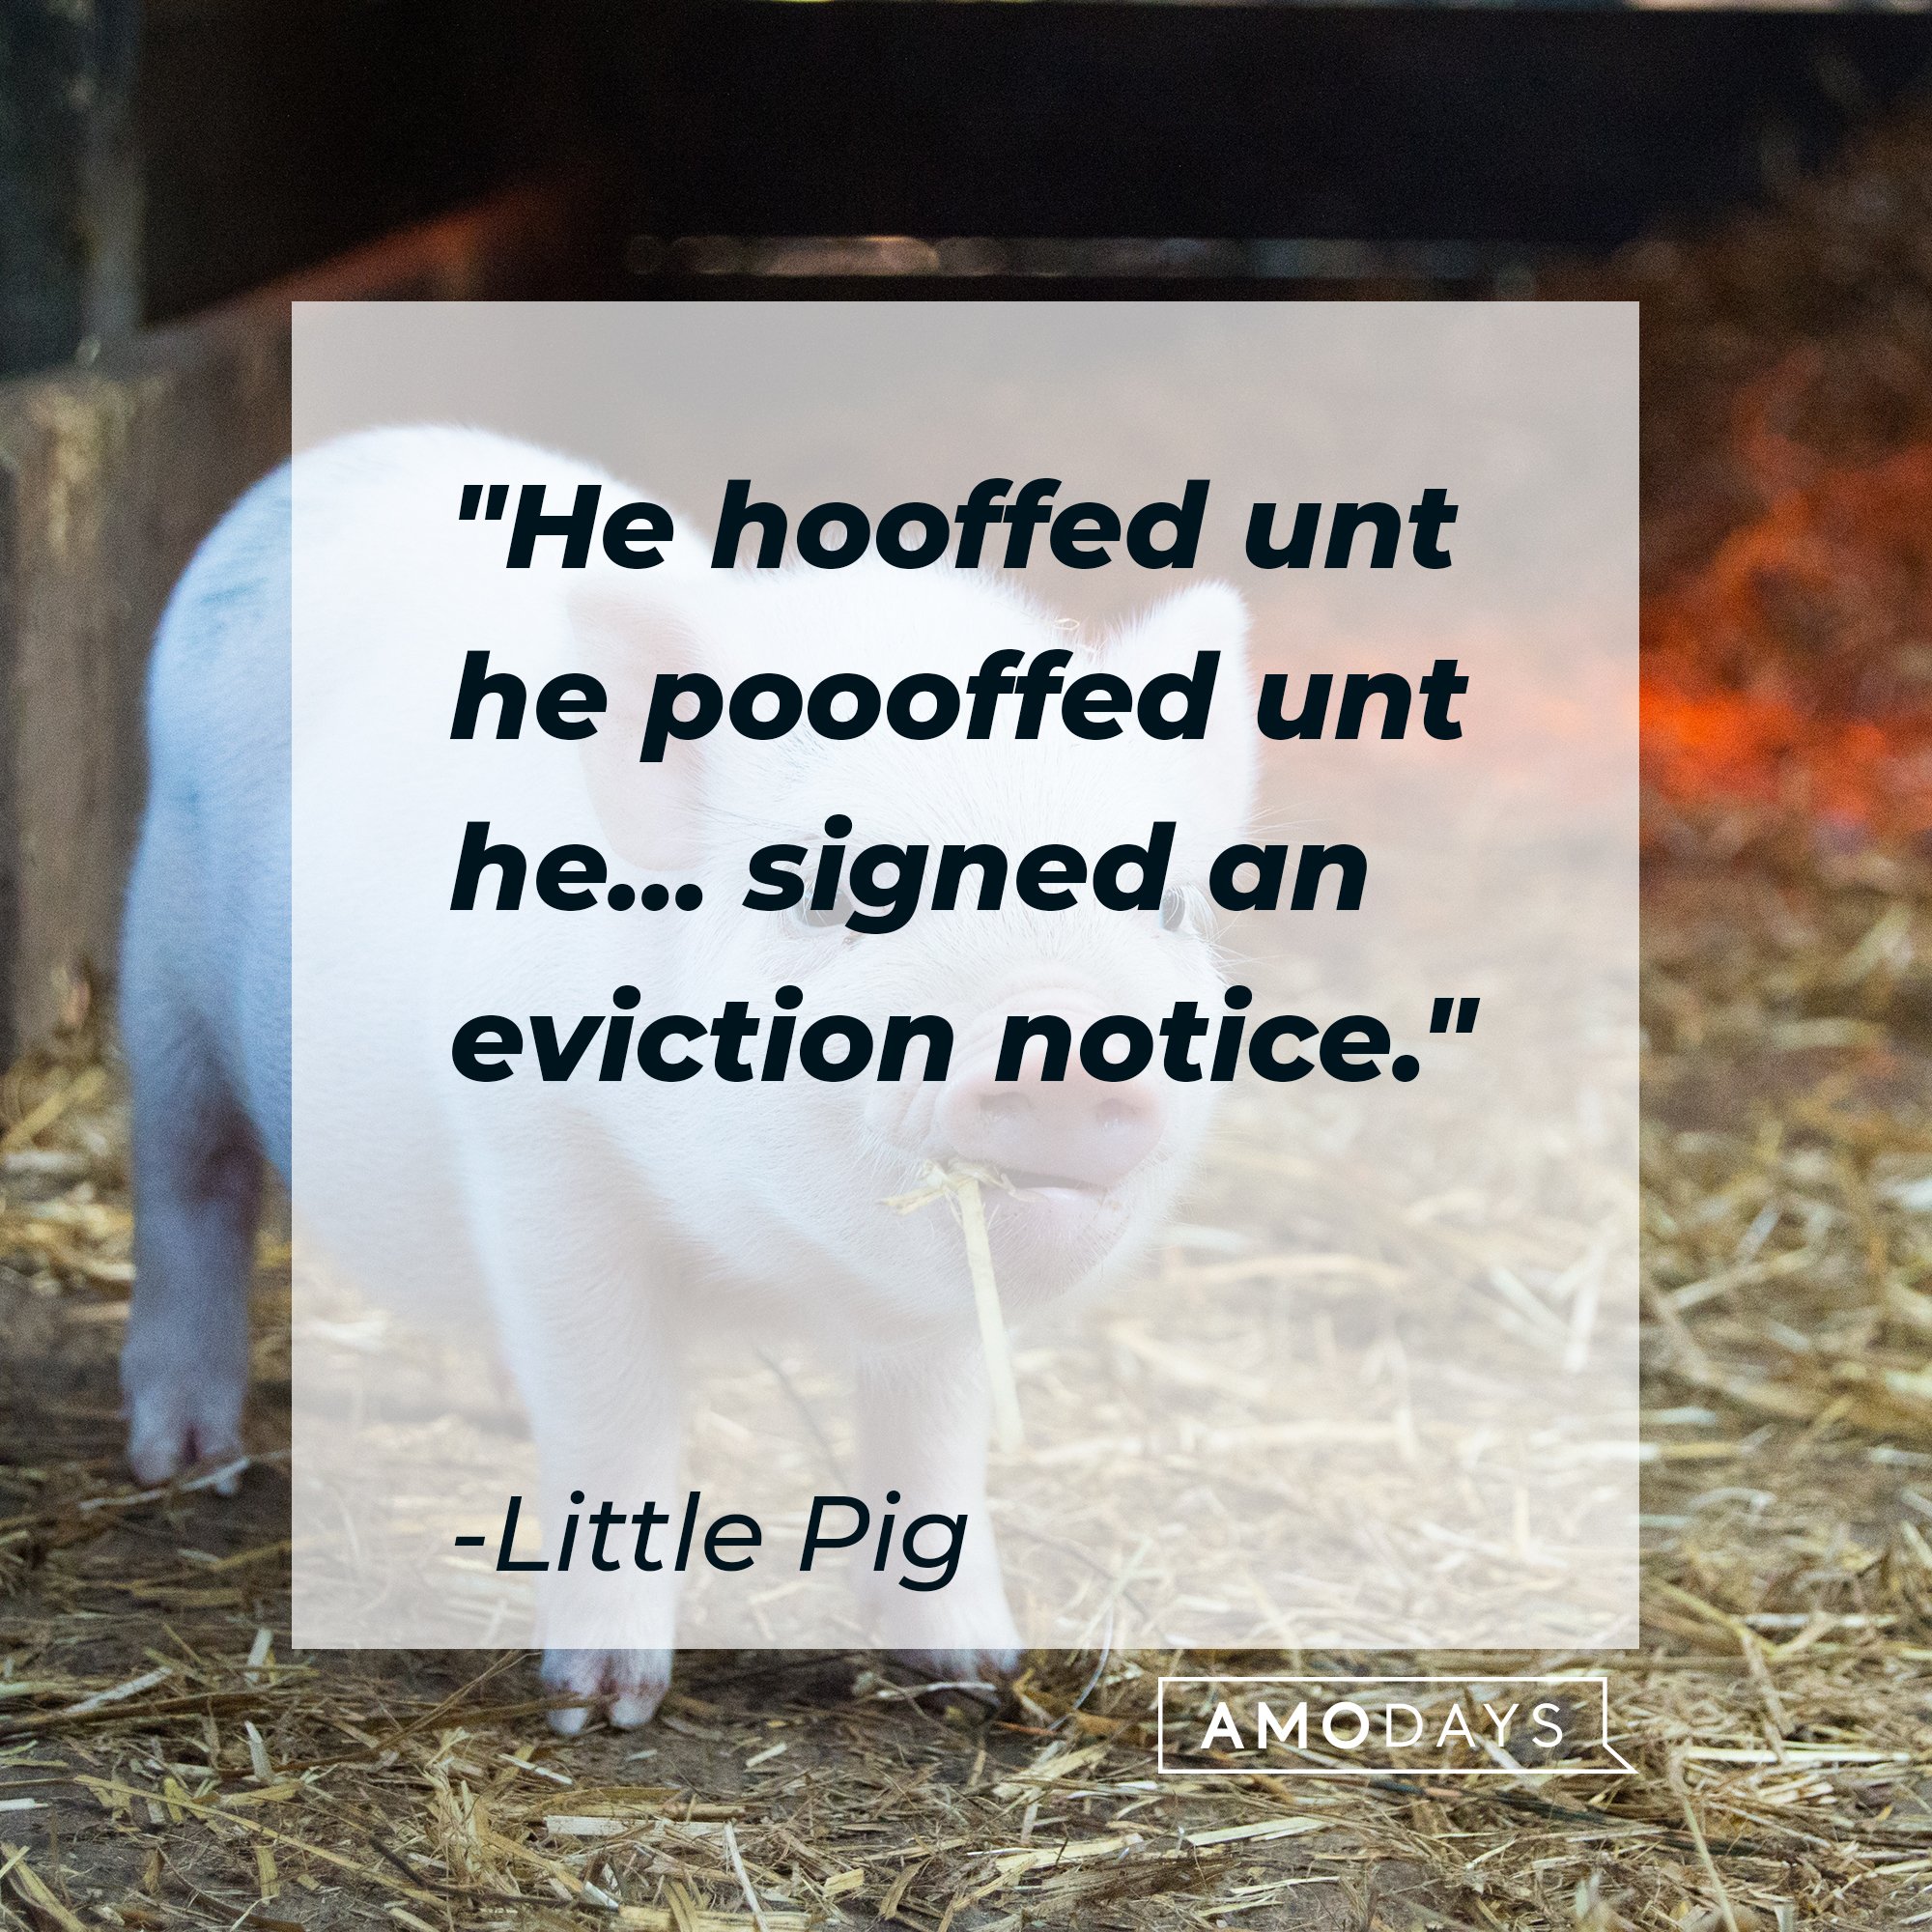 Little Pig's quote: "He hooffed unt he poooffed unt he... signed an eviction notice." | Image: AmoDays